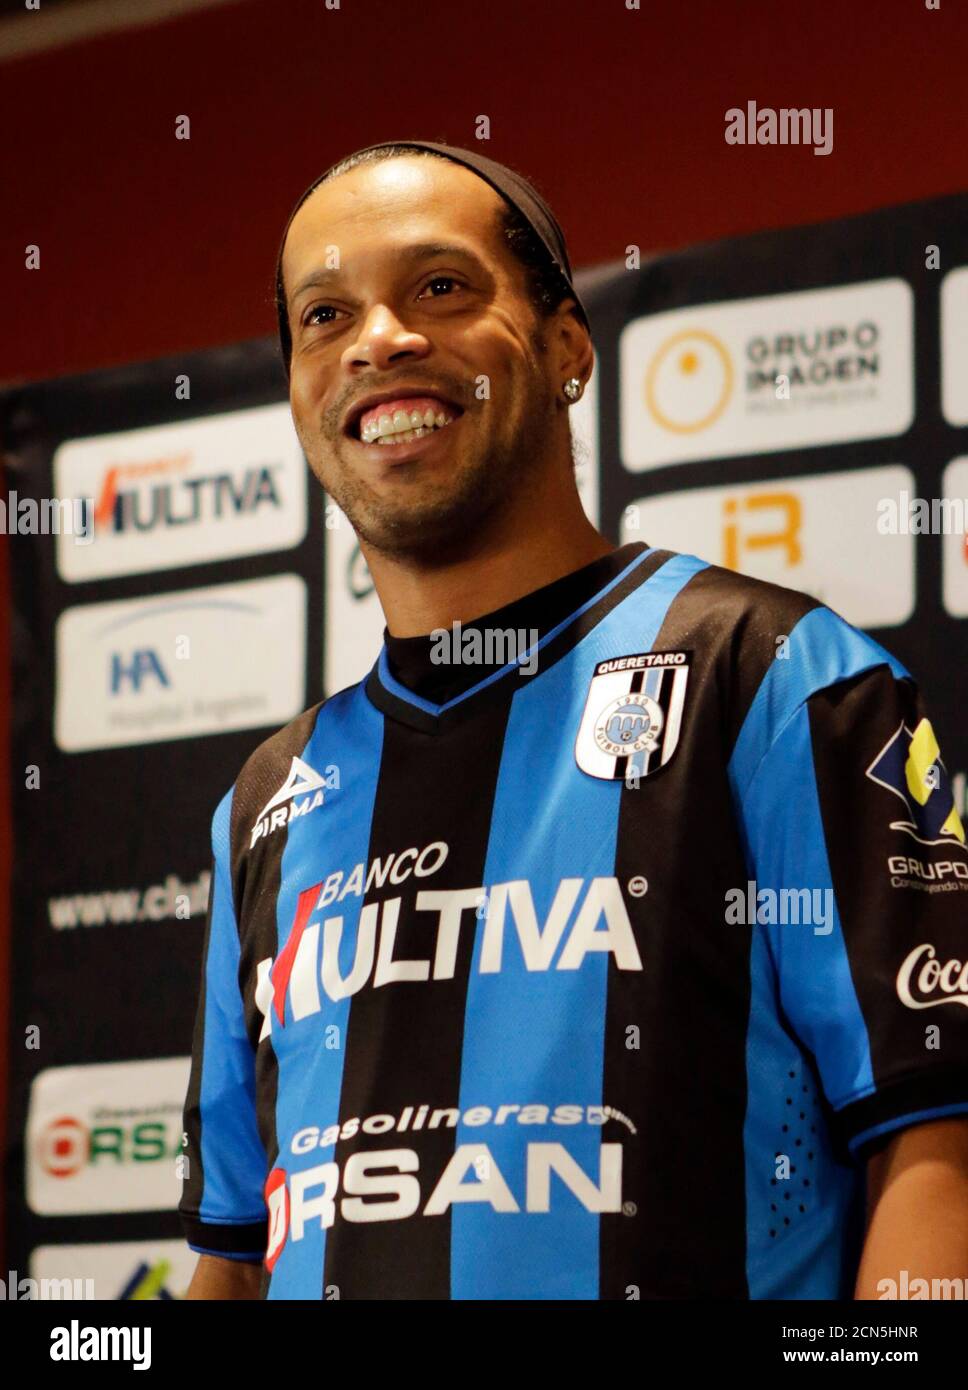 Soccer player Ronaldinho smiles while wearing his new club jersey during a  news conference in Mexico City September 12, 2014. Former Brazil and  Barcelona midfielder Ronaldinho, twice the World Player of the